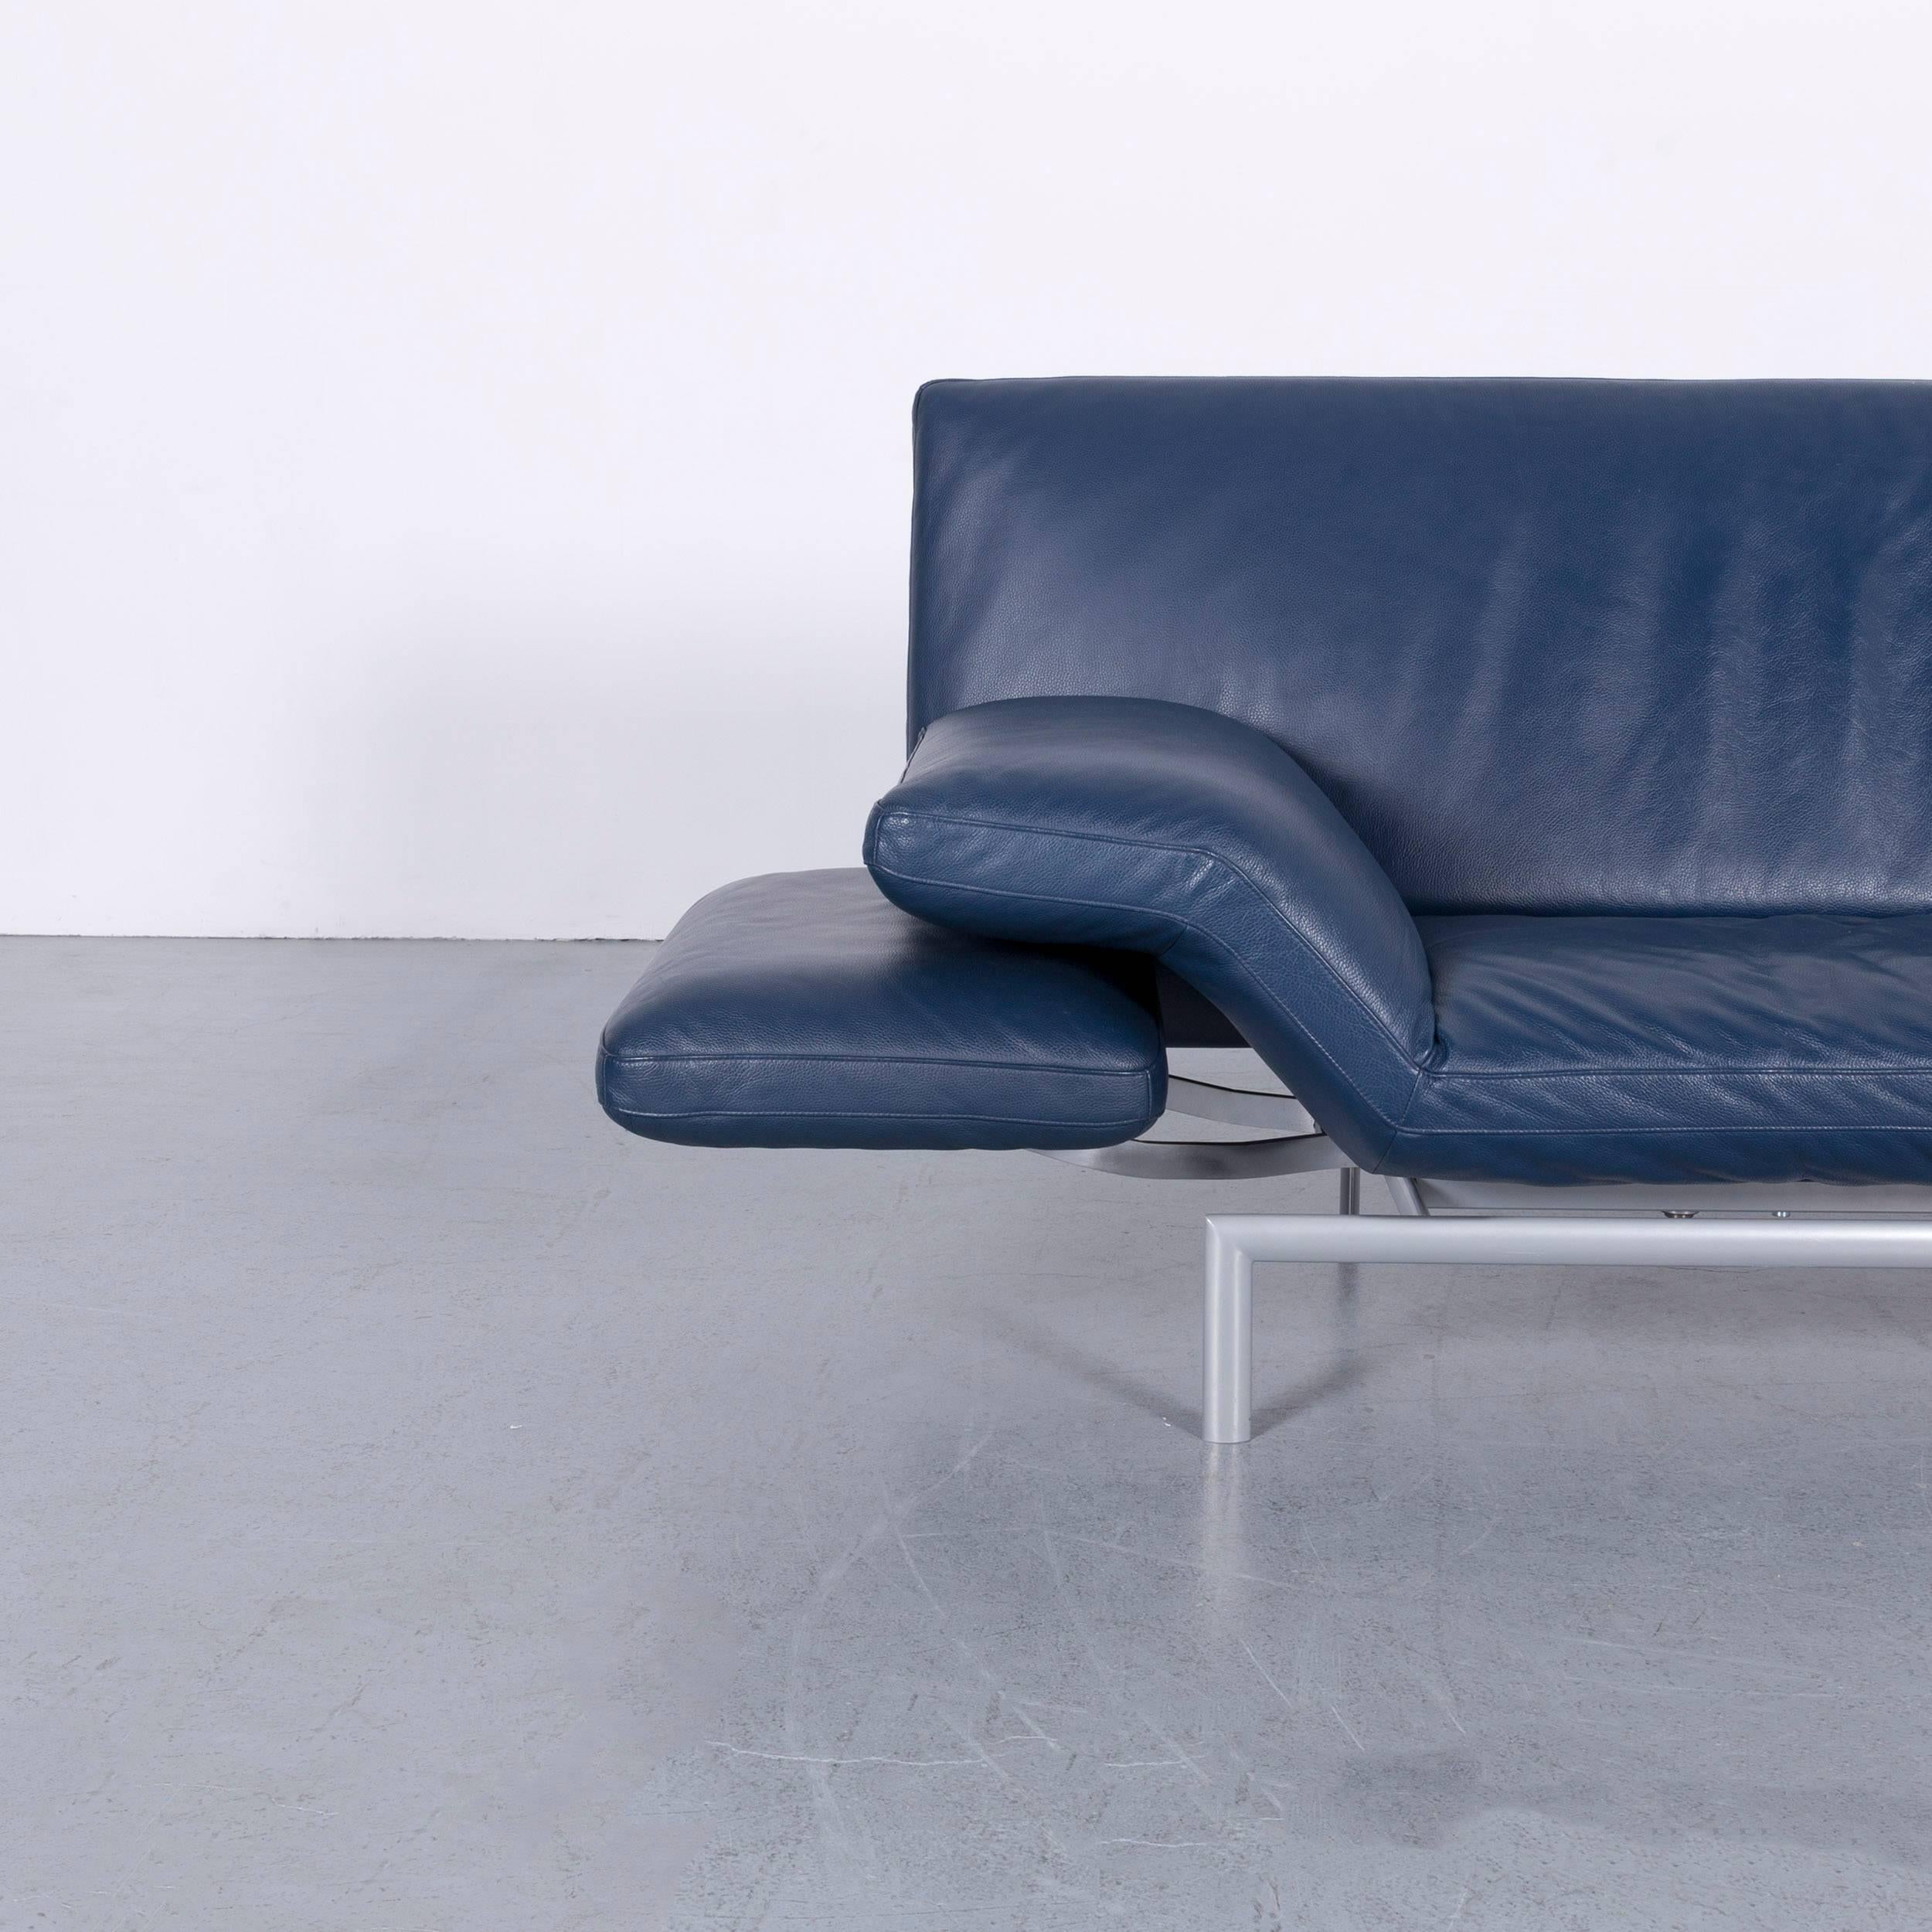 We bring to you an design Flyer leather sofa blue two-seat.

































